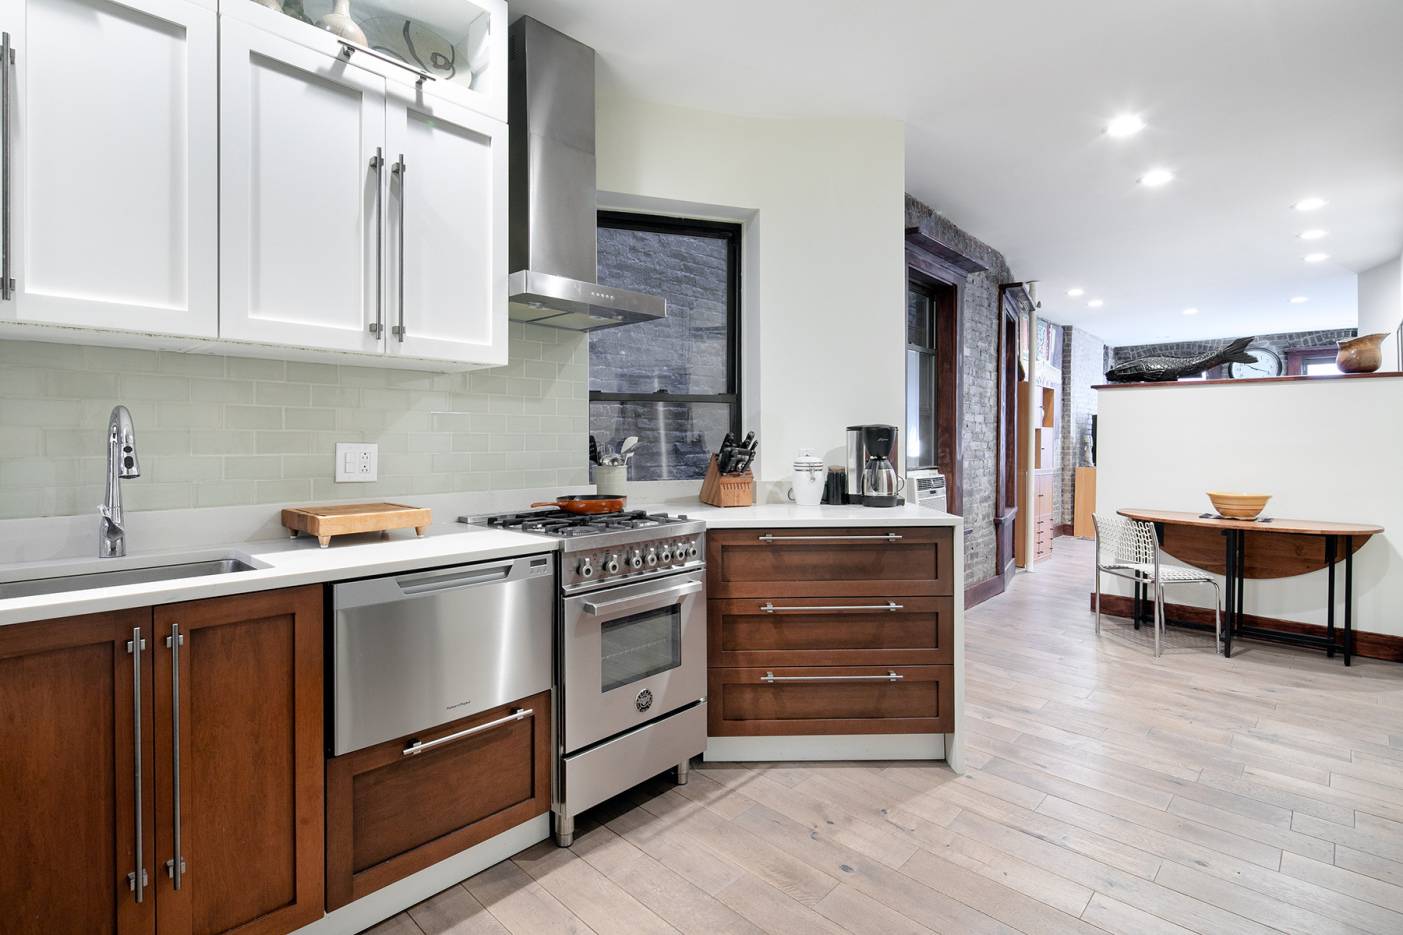 Situated on the beautiful cobblestone section of Perry Street is this wonderful far West Village loft like apartment with pre war charm and modern renovations.